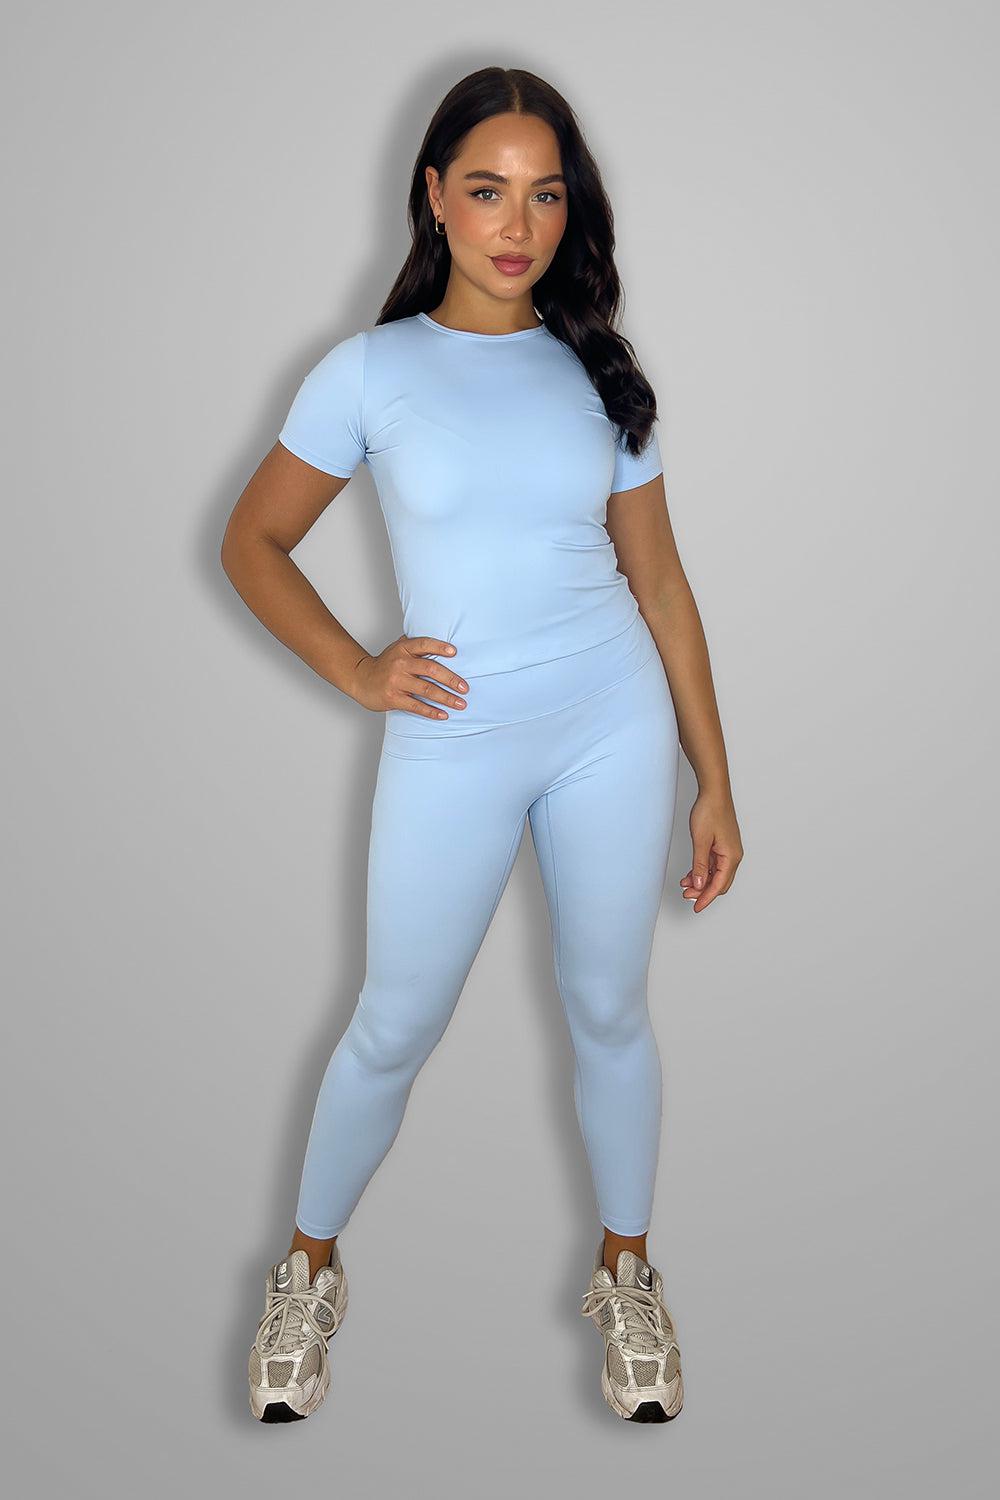 Cup Sleeve Top And Leggings Activewear Set